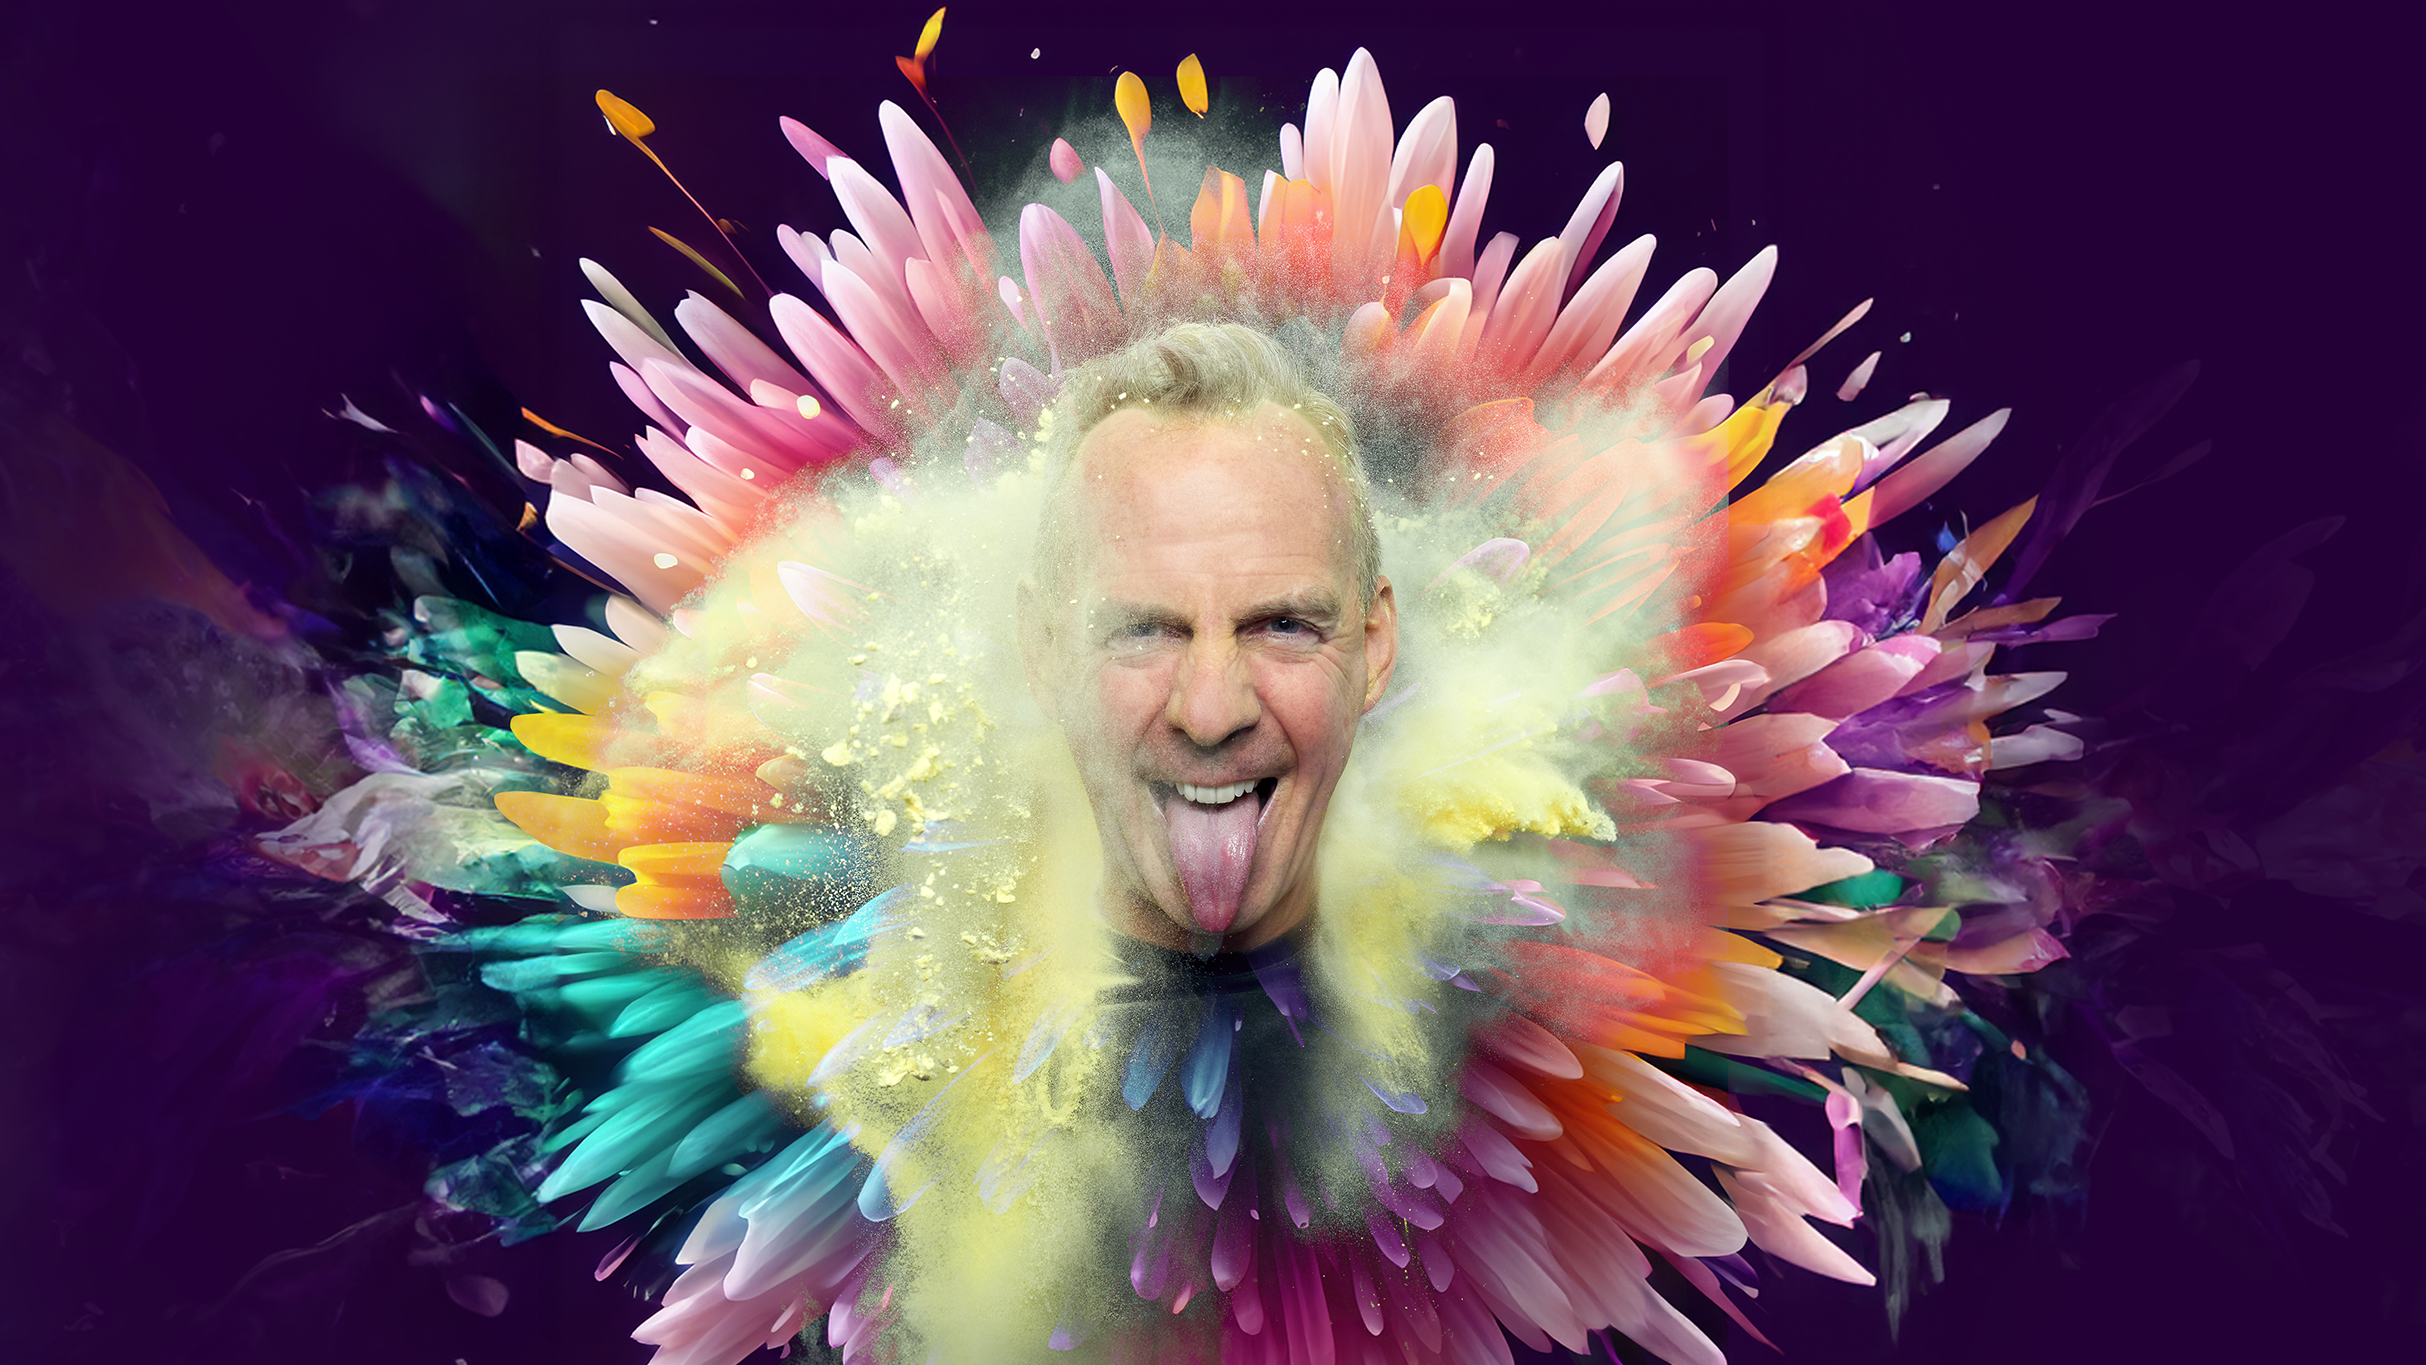 Fatboy Slim in Halifax promo photo for The Piece Hall Members presale offer code